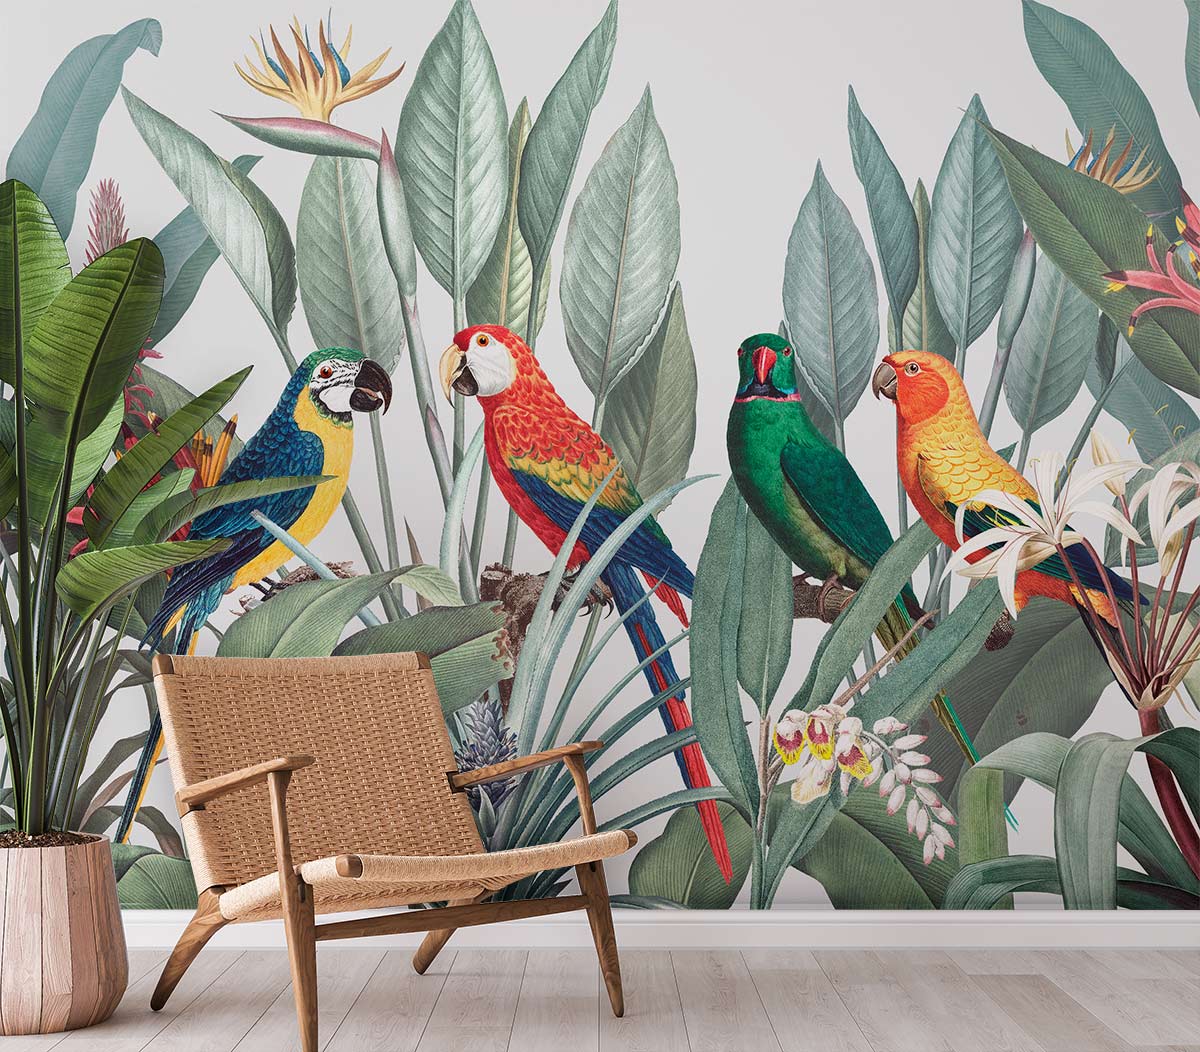 Macaws in a Rainbow of Colors Wallpaper Mural for the Living Room